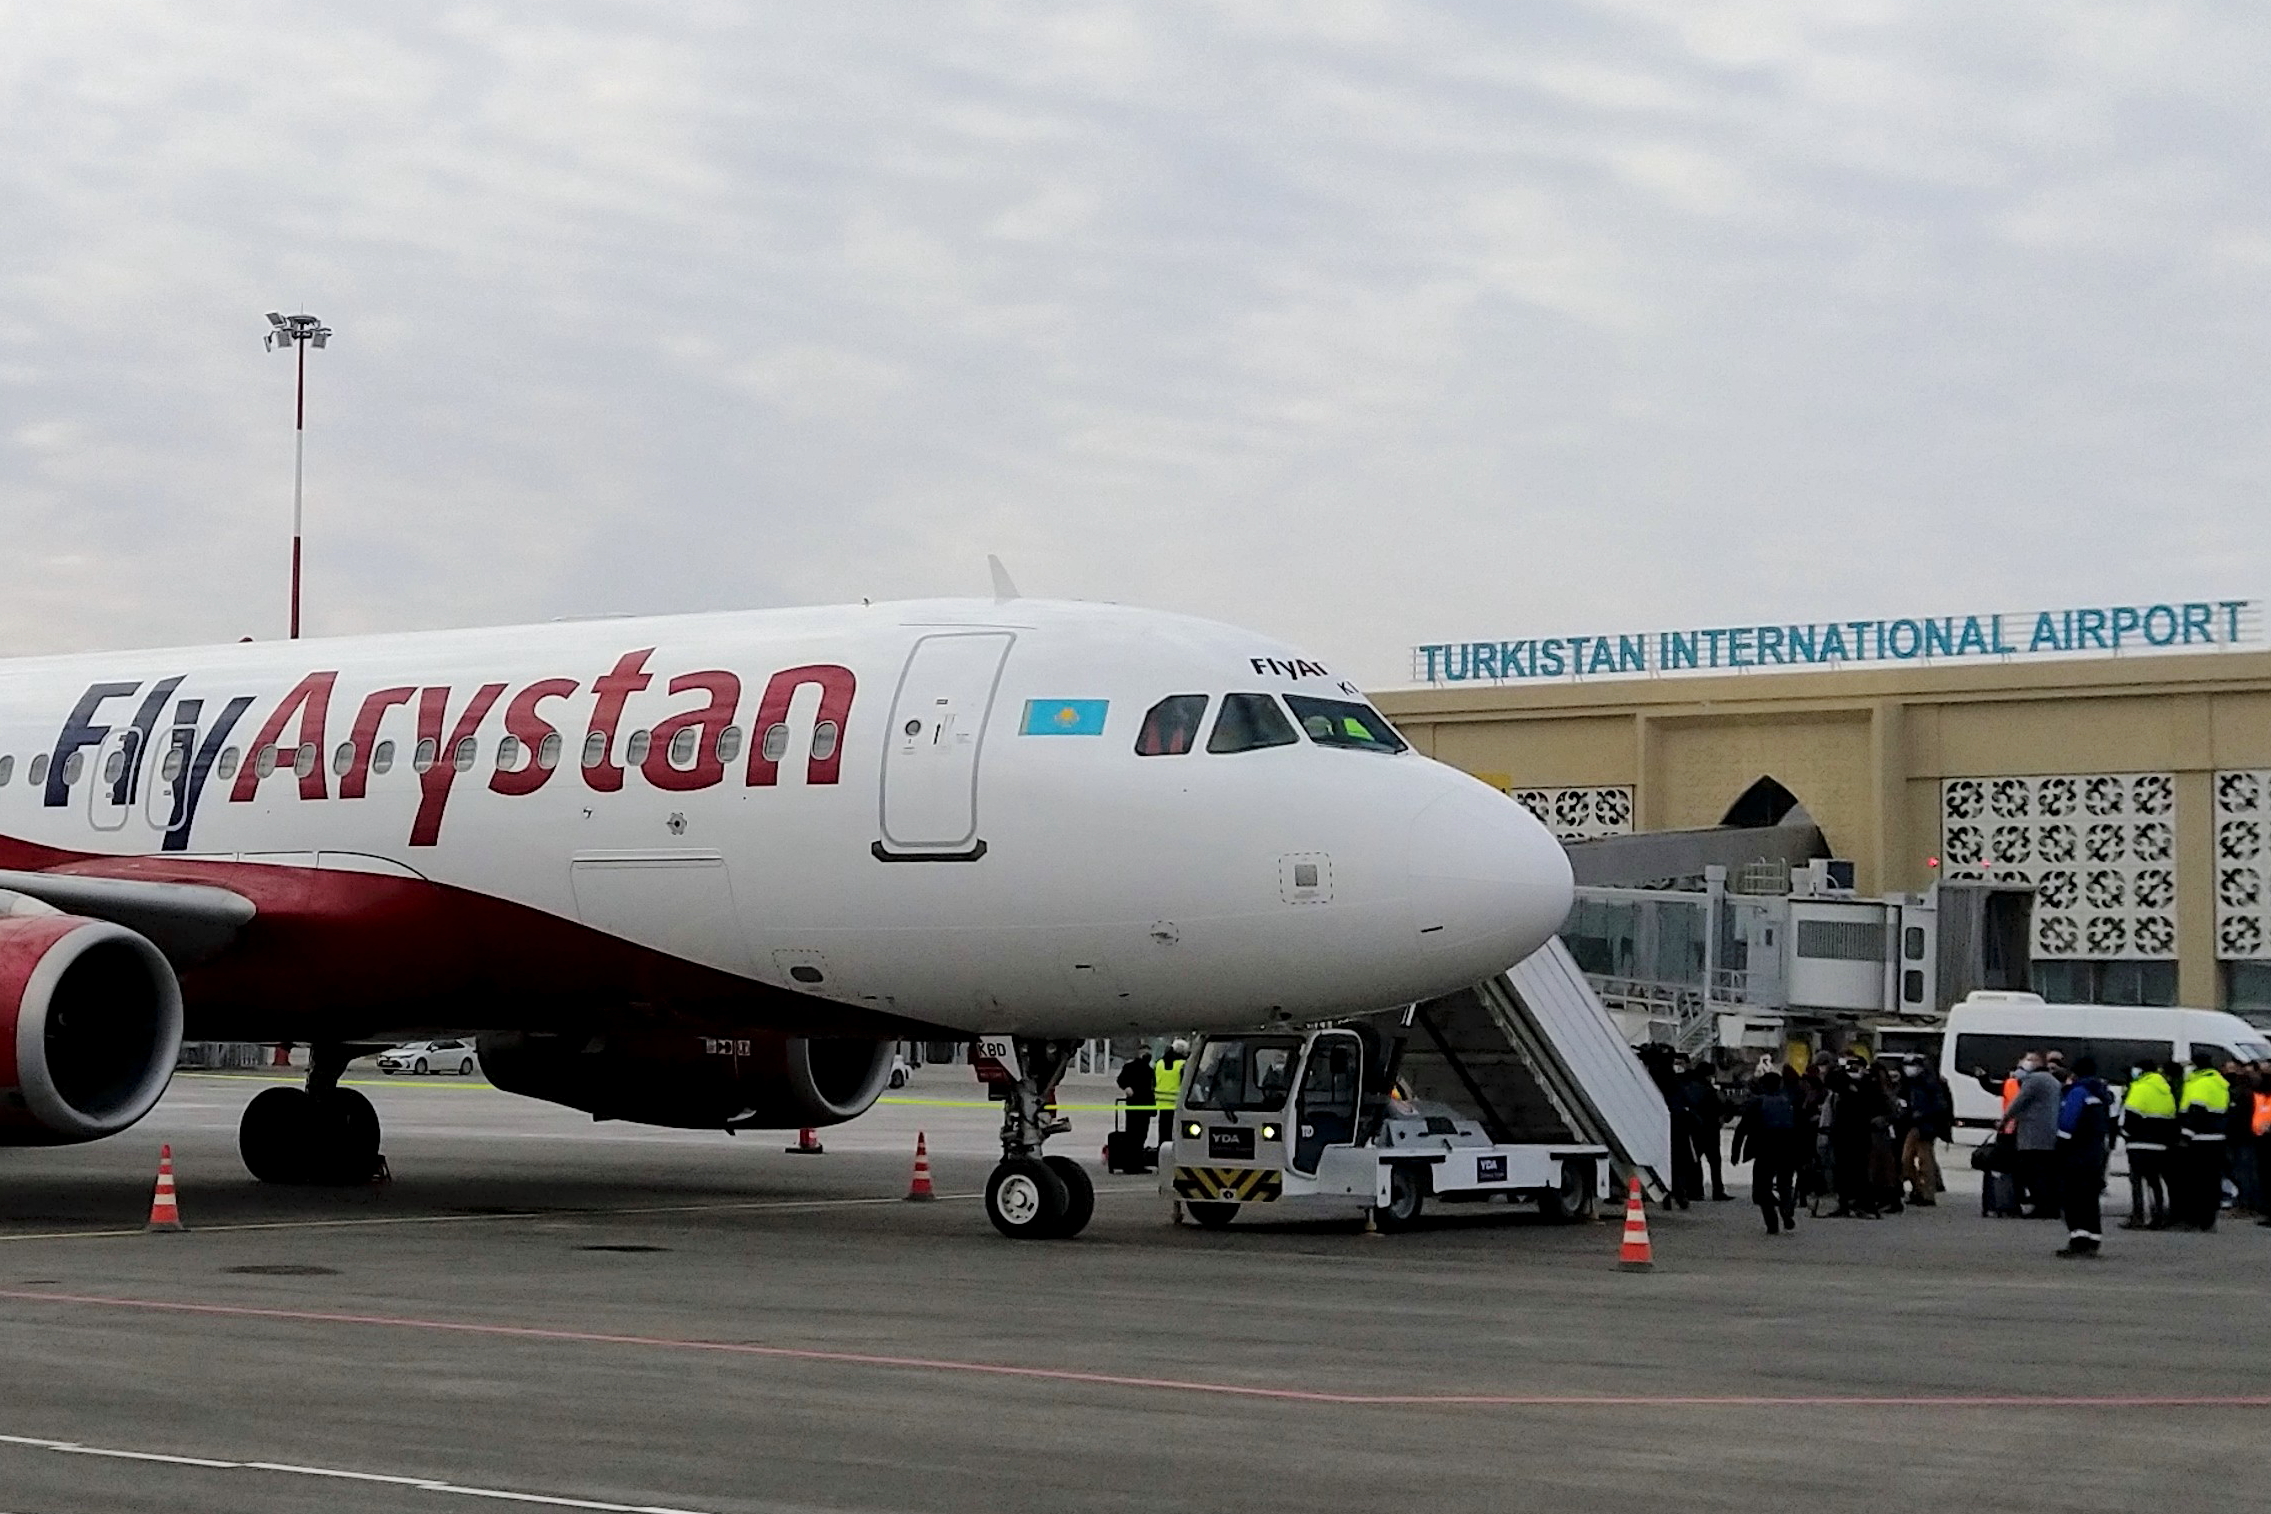 FlyArystan Airbus A320 in Turkistan. Click to enlarge.